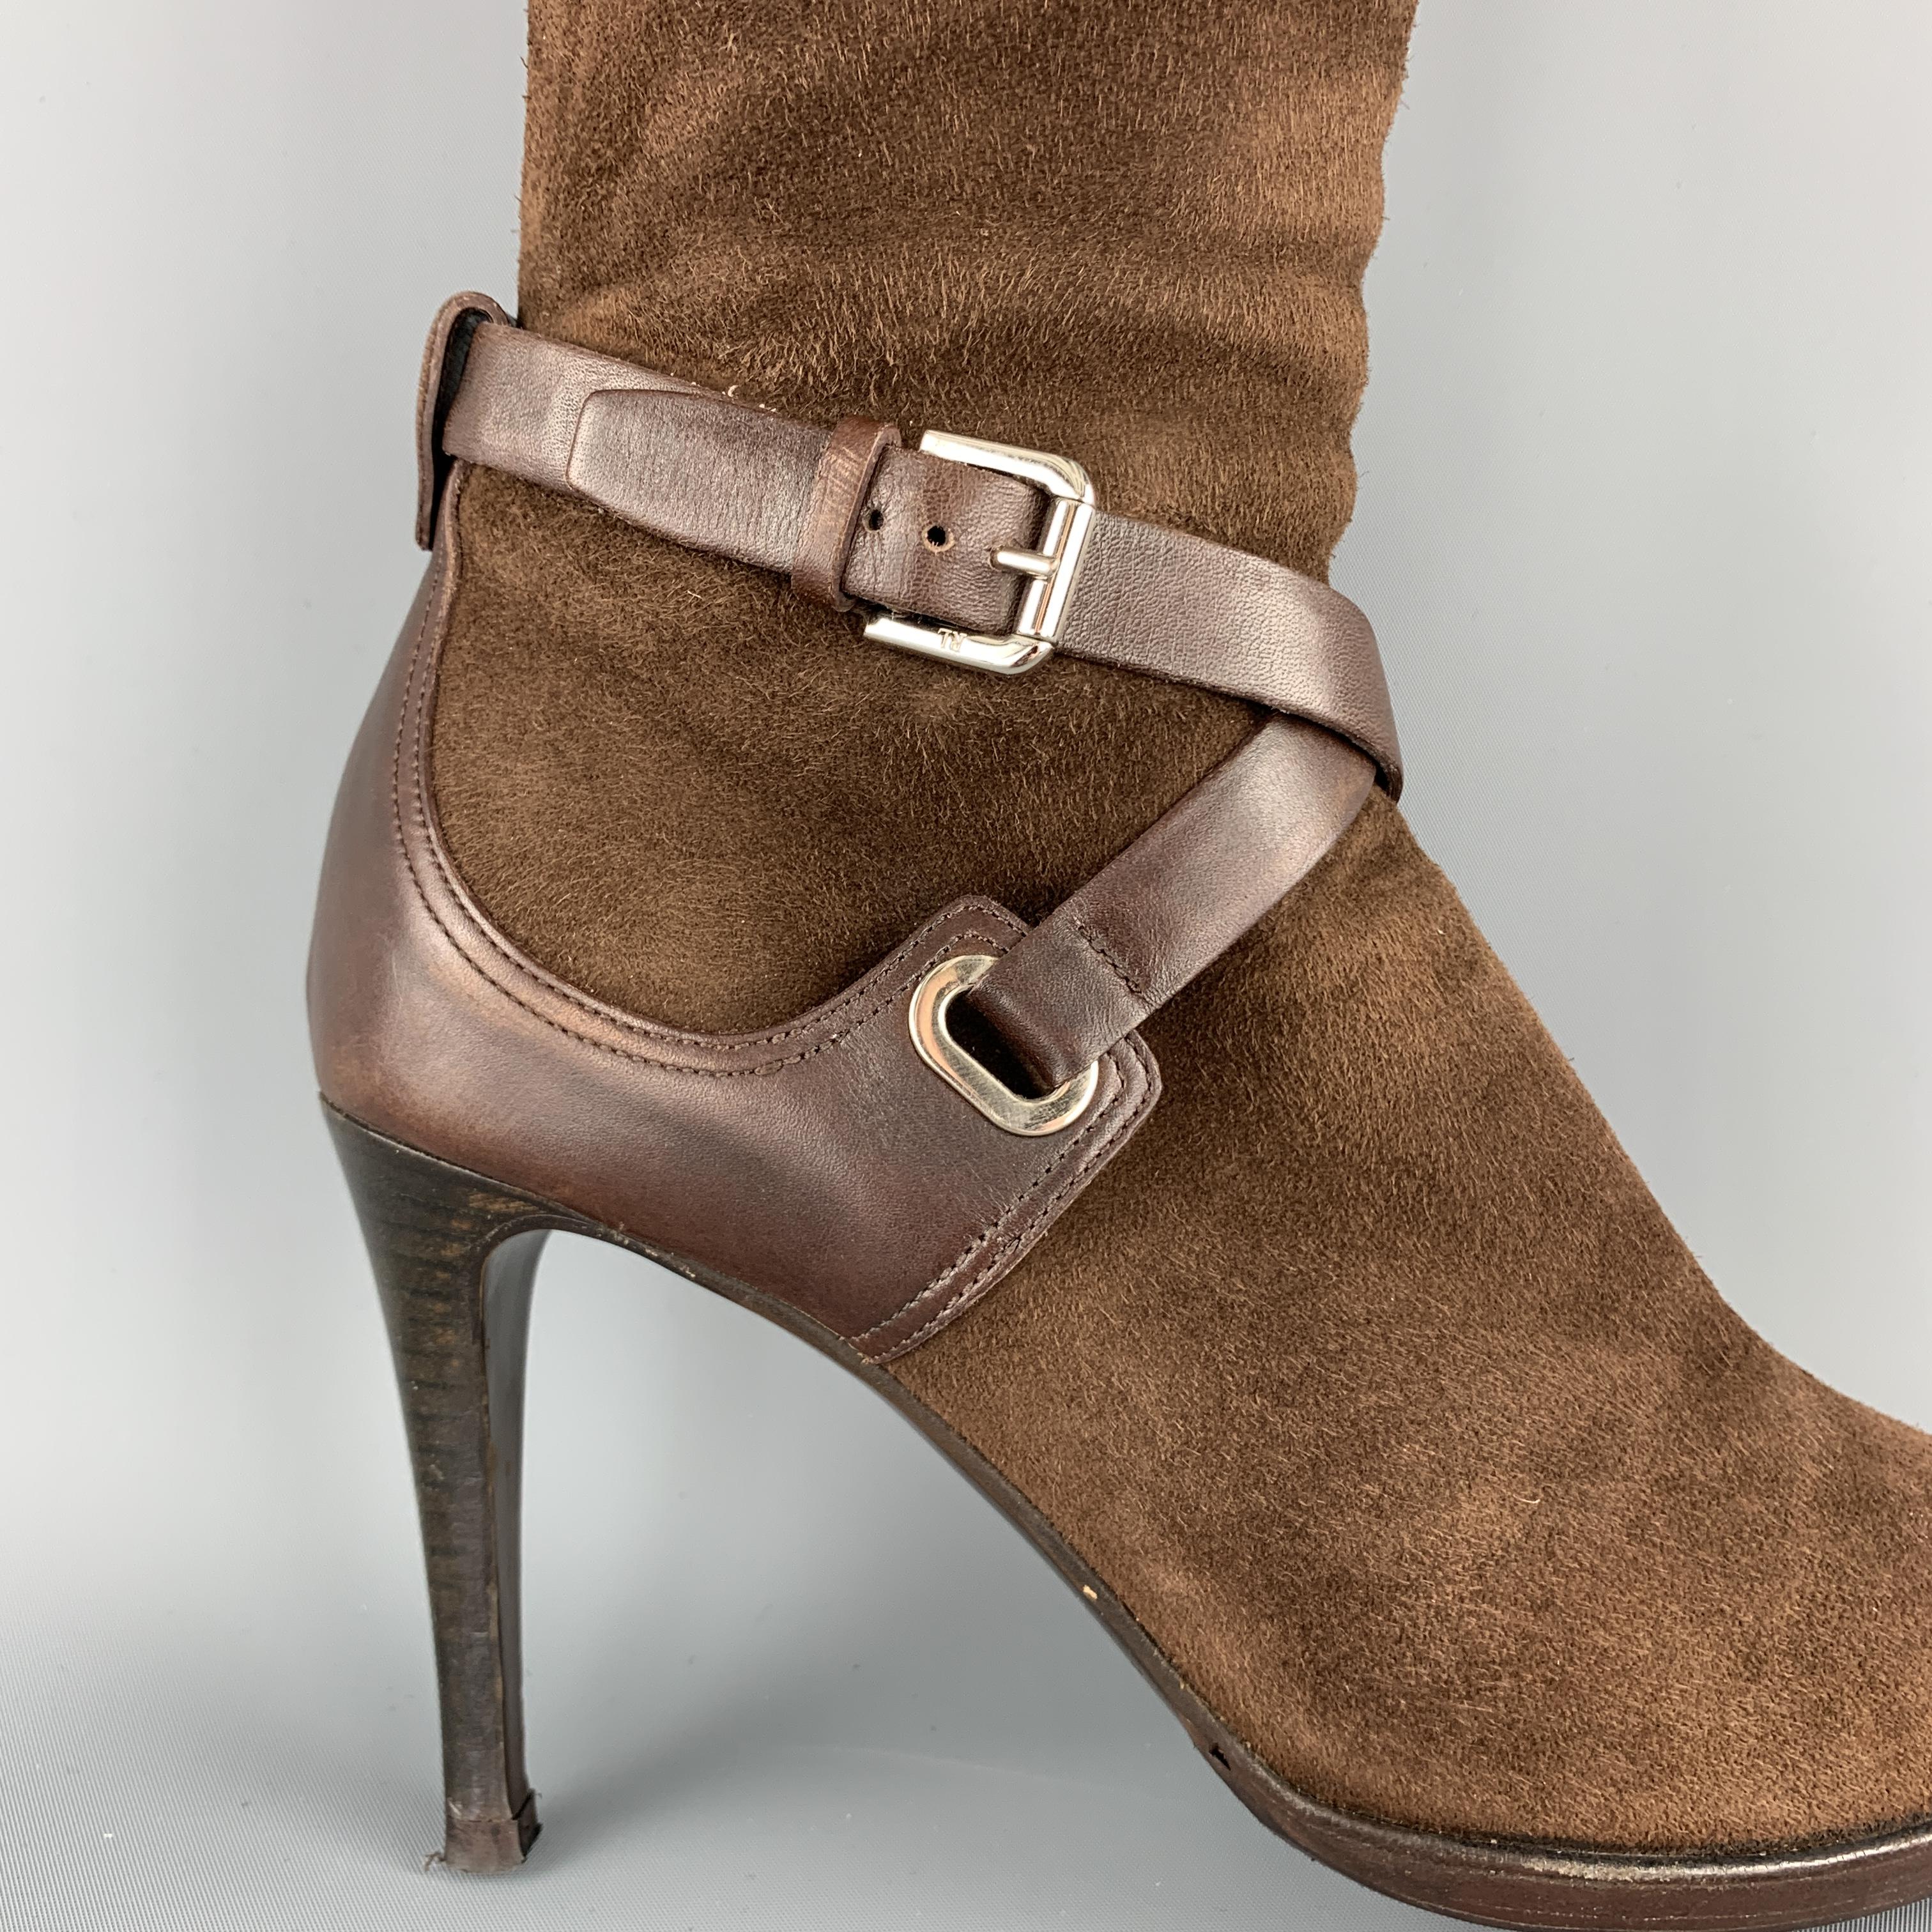 RALPH LAUREN boots come in brown suede with a pointed toe, stiletto heel, knee high shaft, and leather ankle straps. Made in Italy.

Good Pre-Owned Condition.
Marked: US 7B

Heel: 4.75 in.
Length: 15 in.